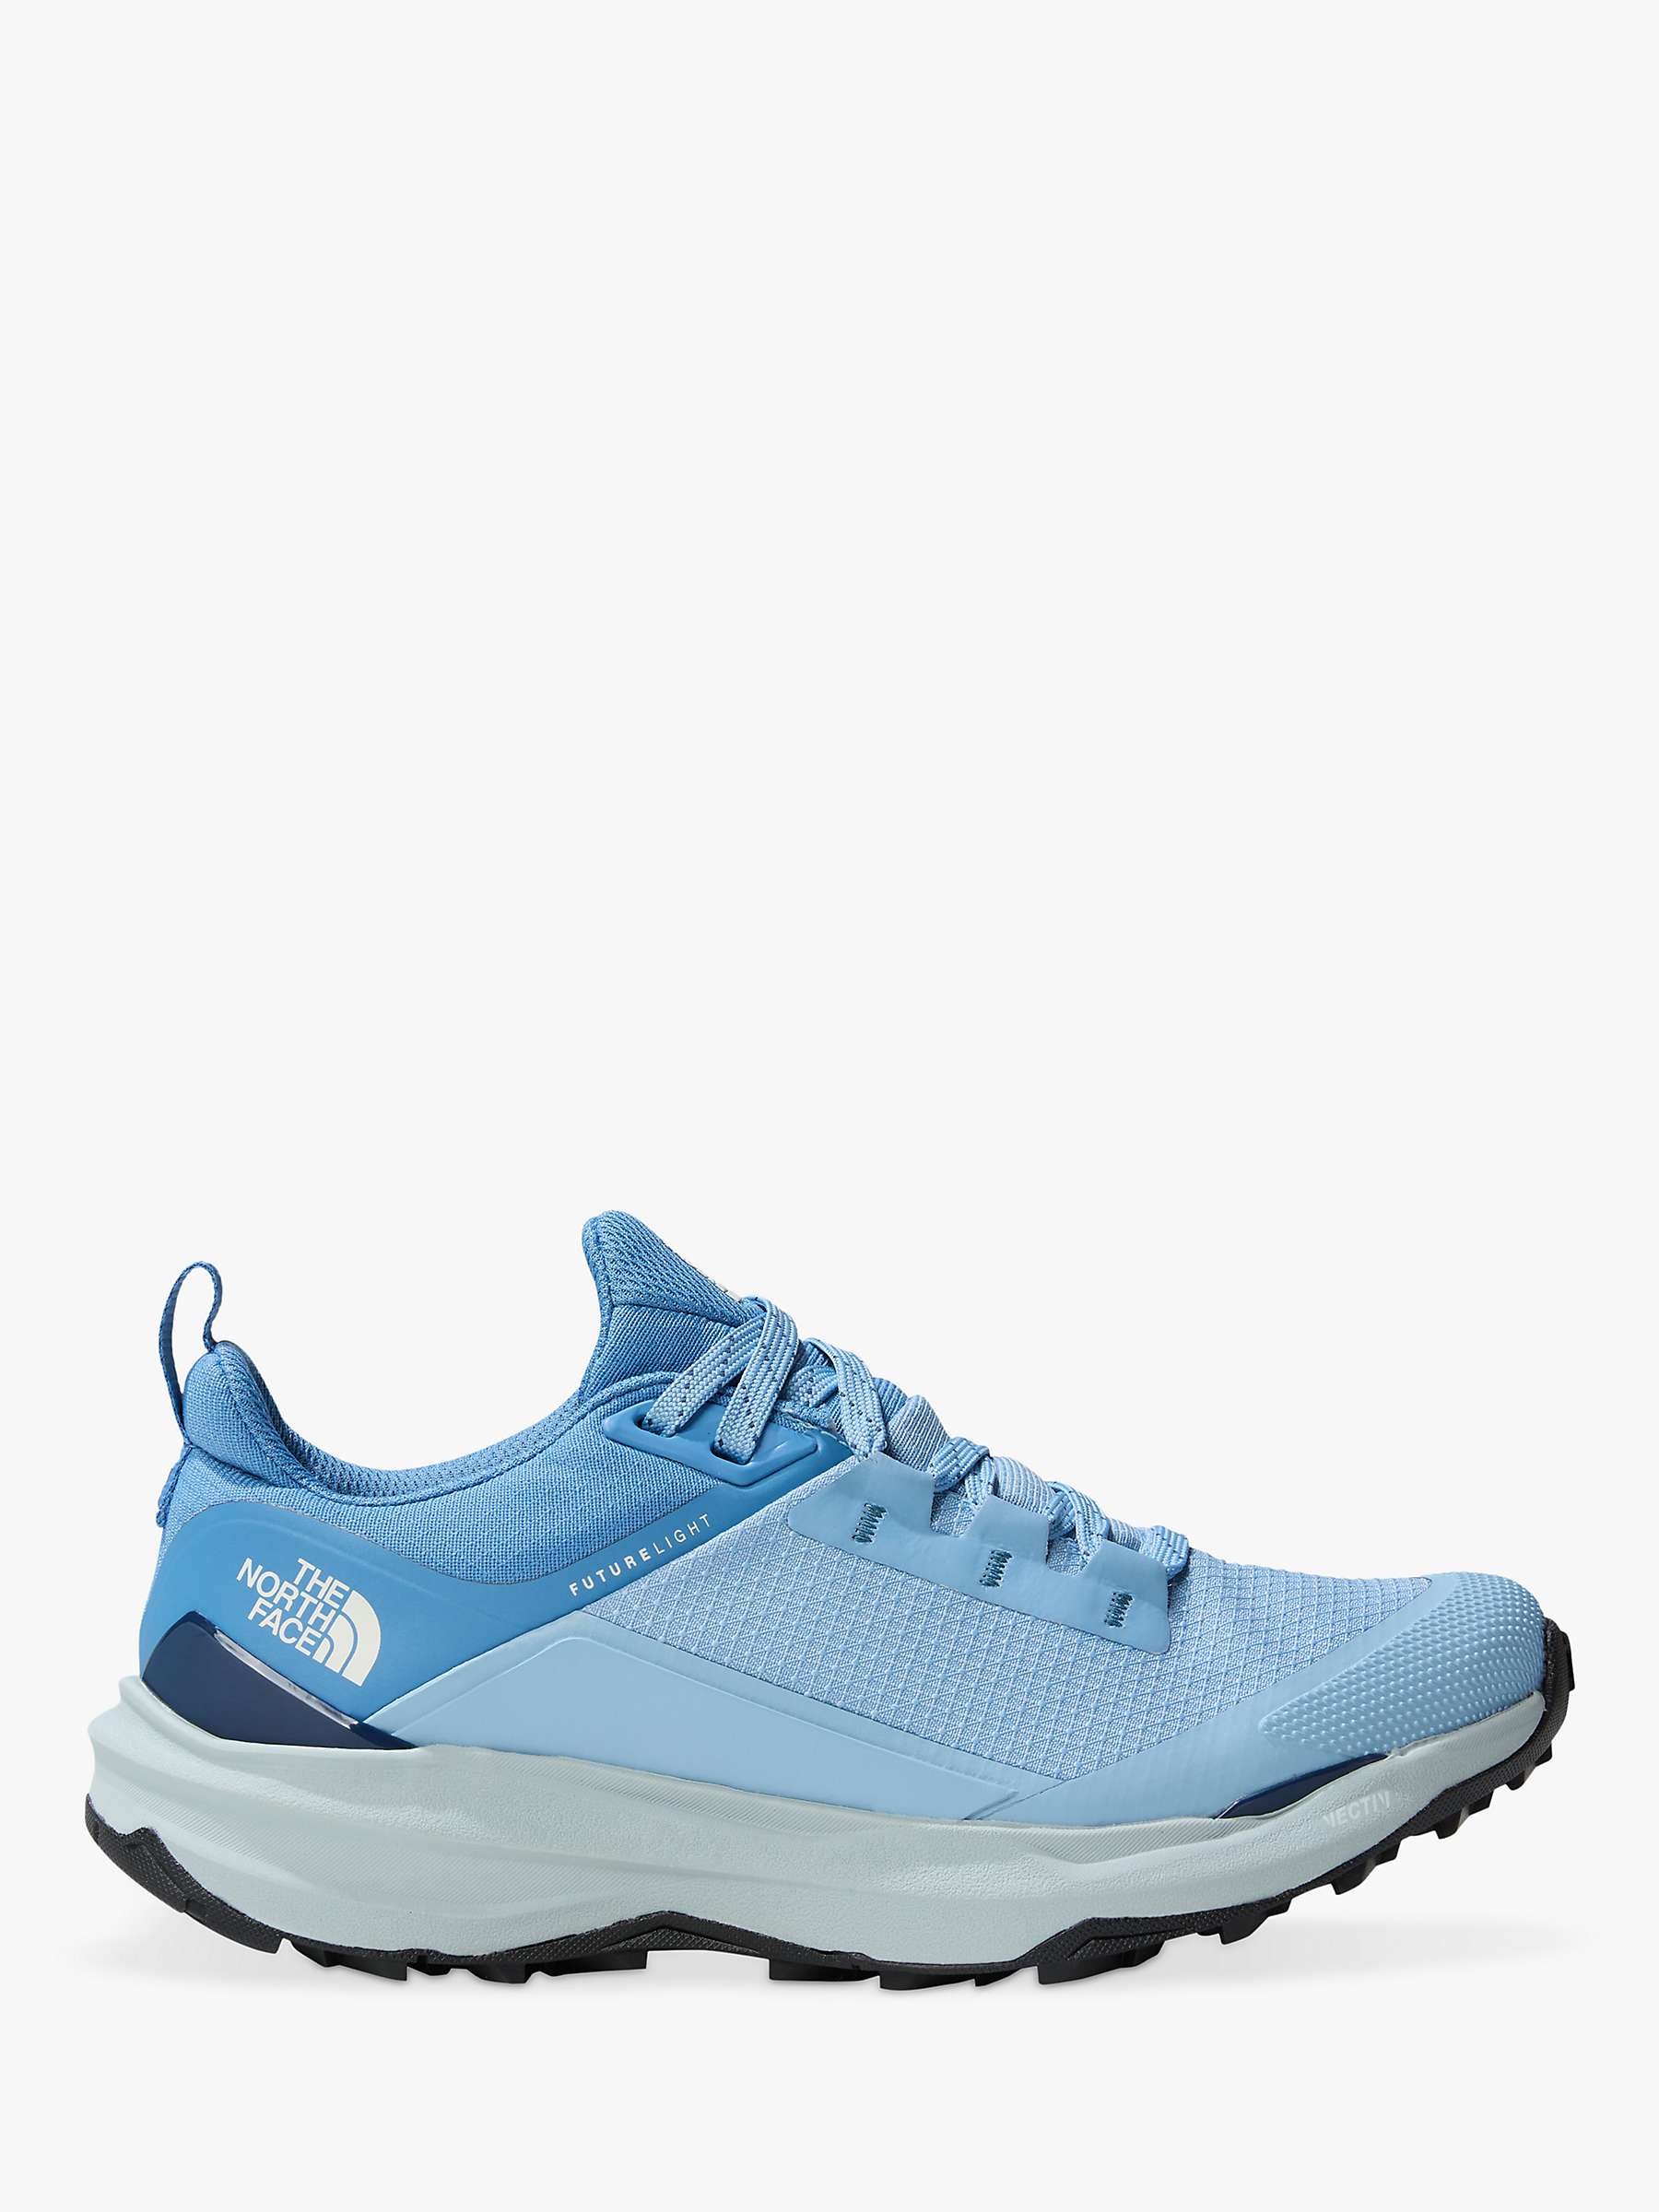 Buy The North Face Vectiv Exploris II Hiking Shoes, Blue Online at johnlewis.com